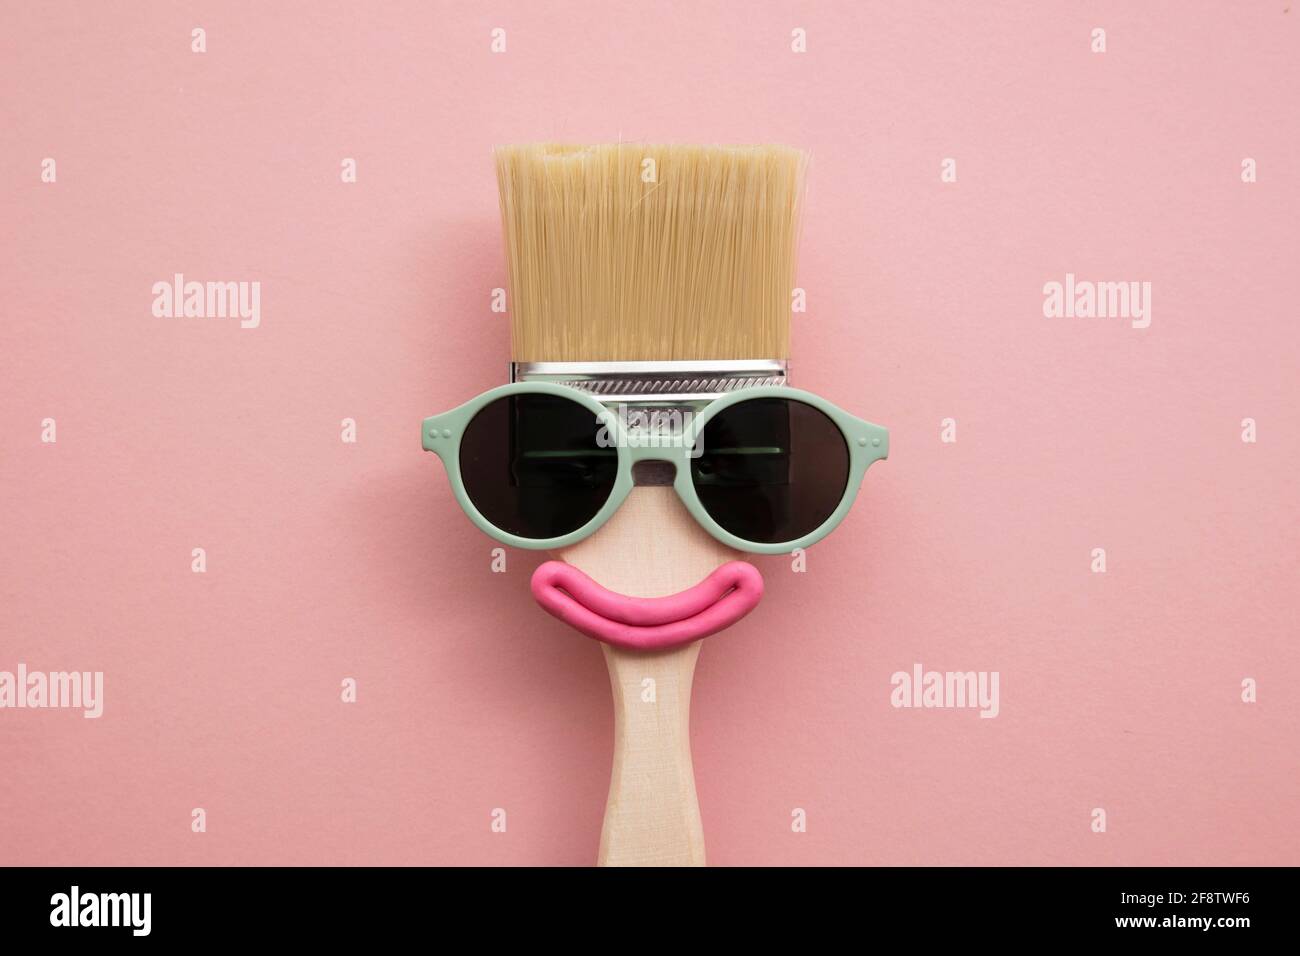 Paint brush diy character with sunglasses and smile Stock Photo